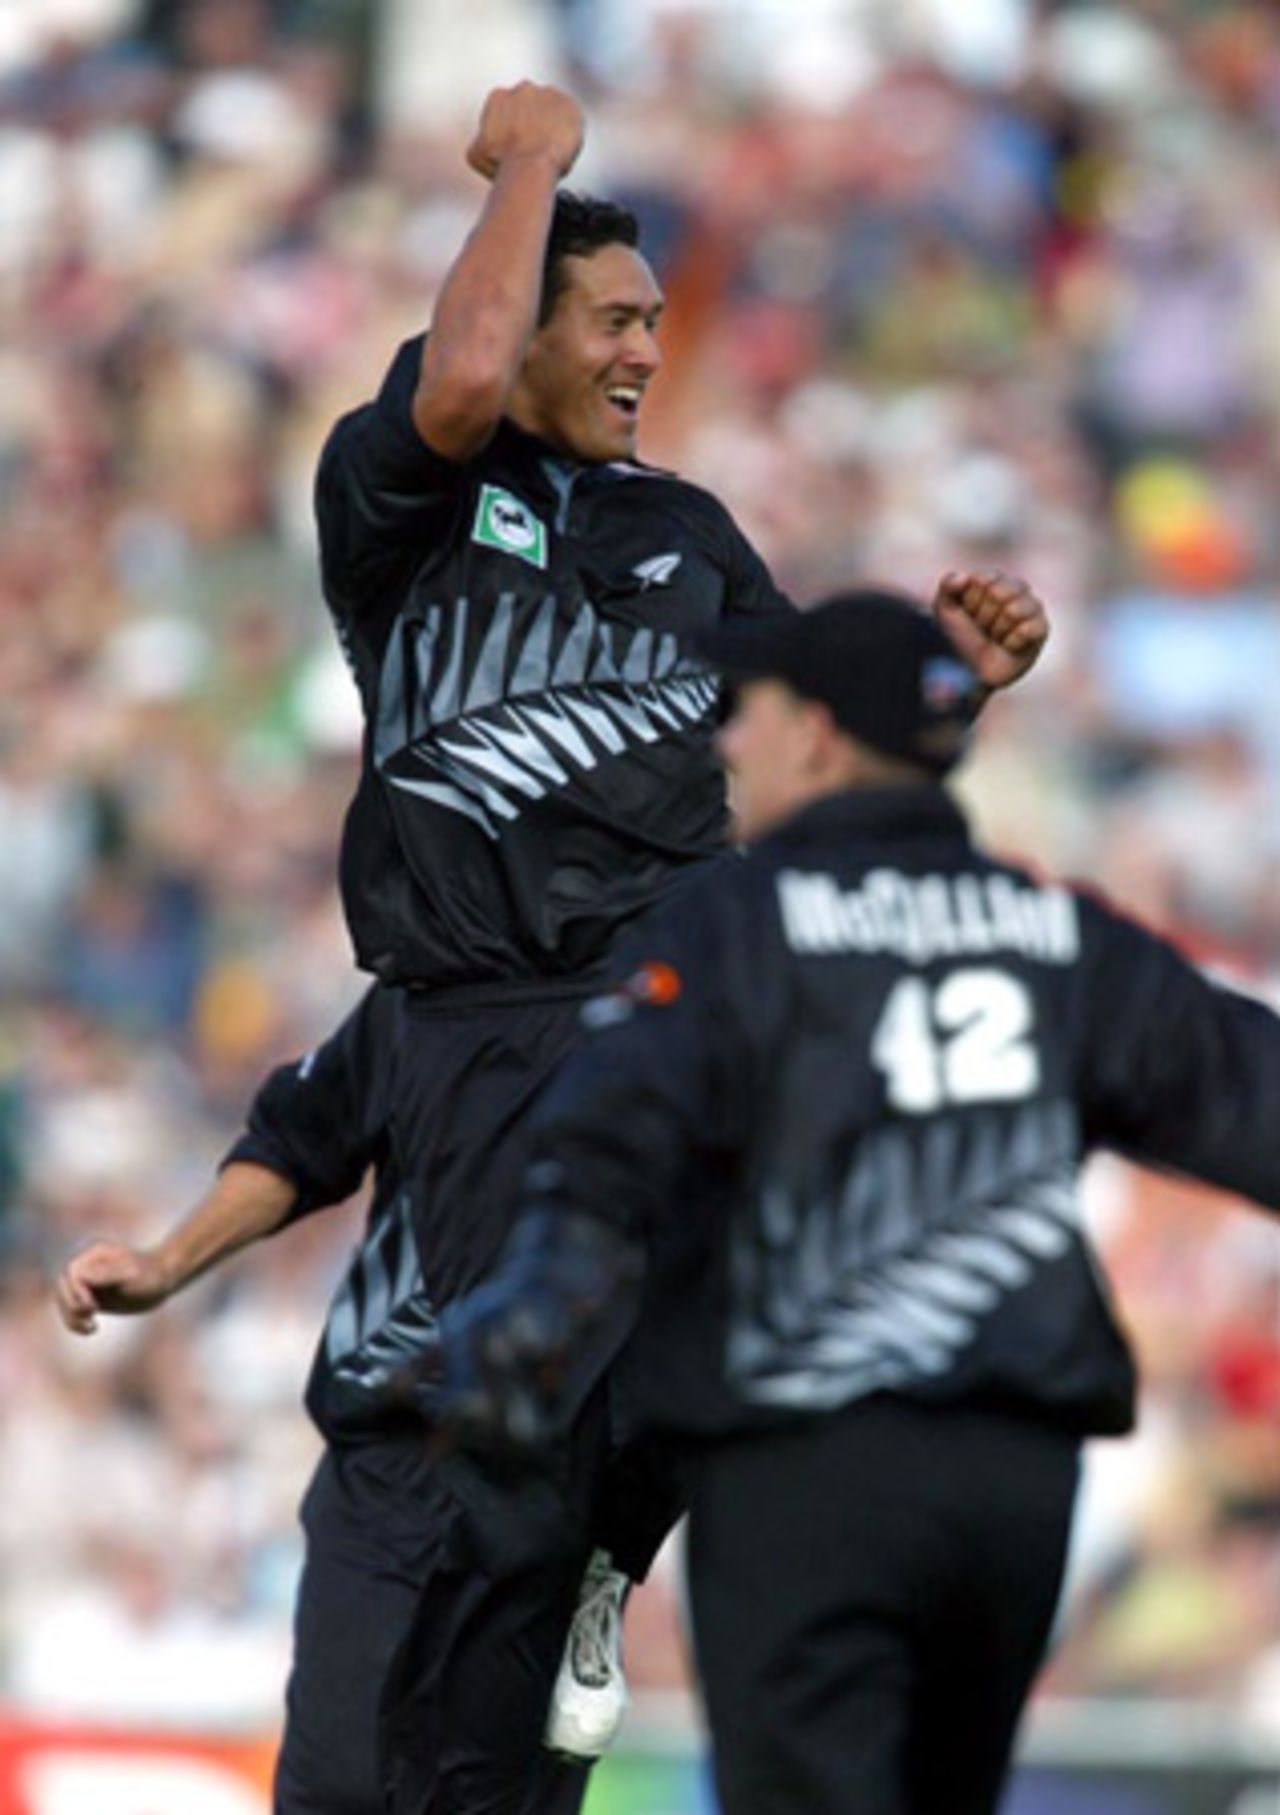 New Zealand bowler Daryl Tuffey leaps to celebrate the dismissal of Indian batsman Mohammad Kaif, caught by wicket-keeper Brendon McCullum (right) for 24. 2nd ODI: New Zealand v India at McLean Park, Napier, 29 December 2002.